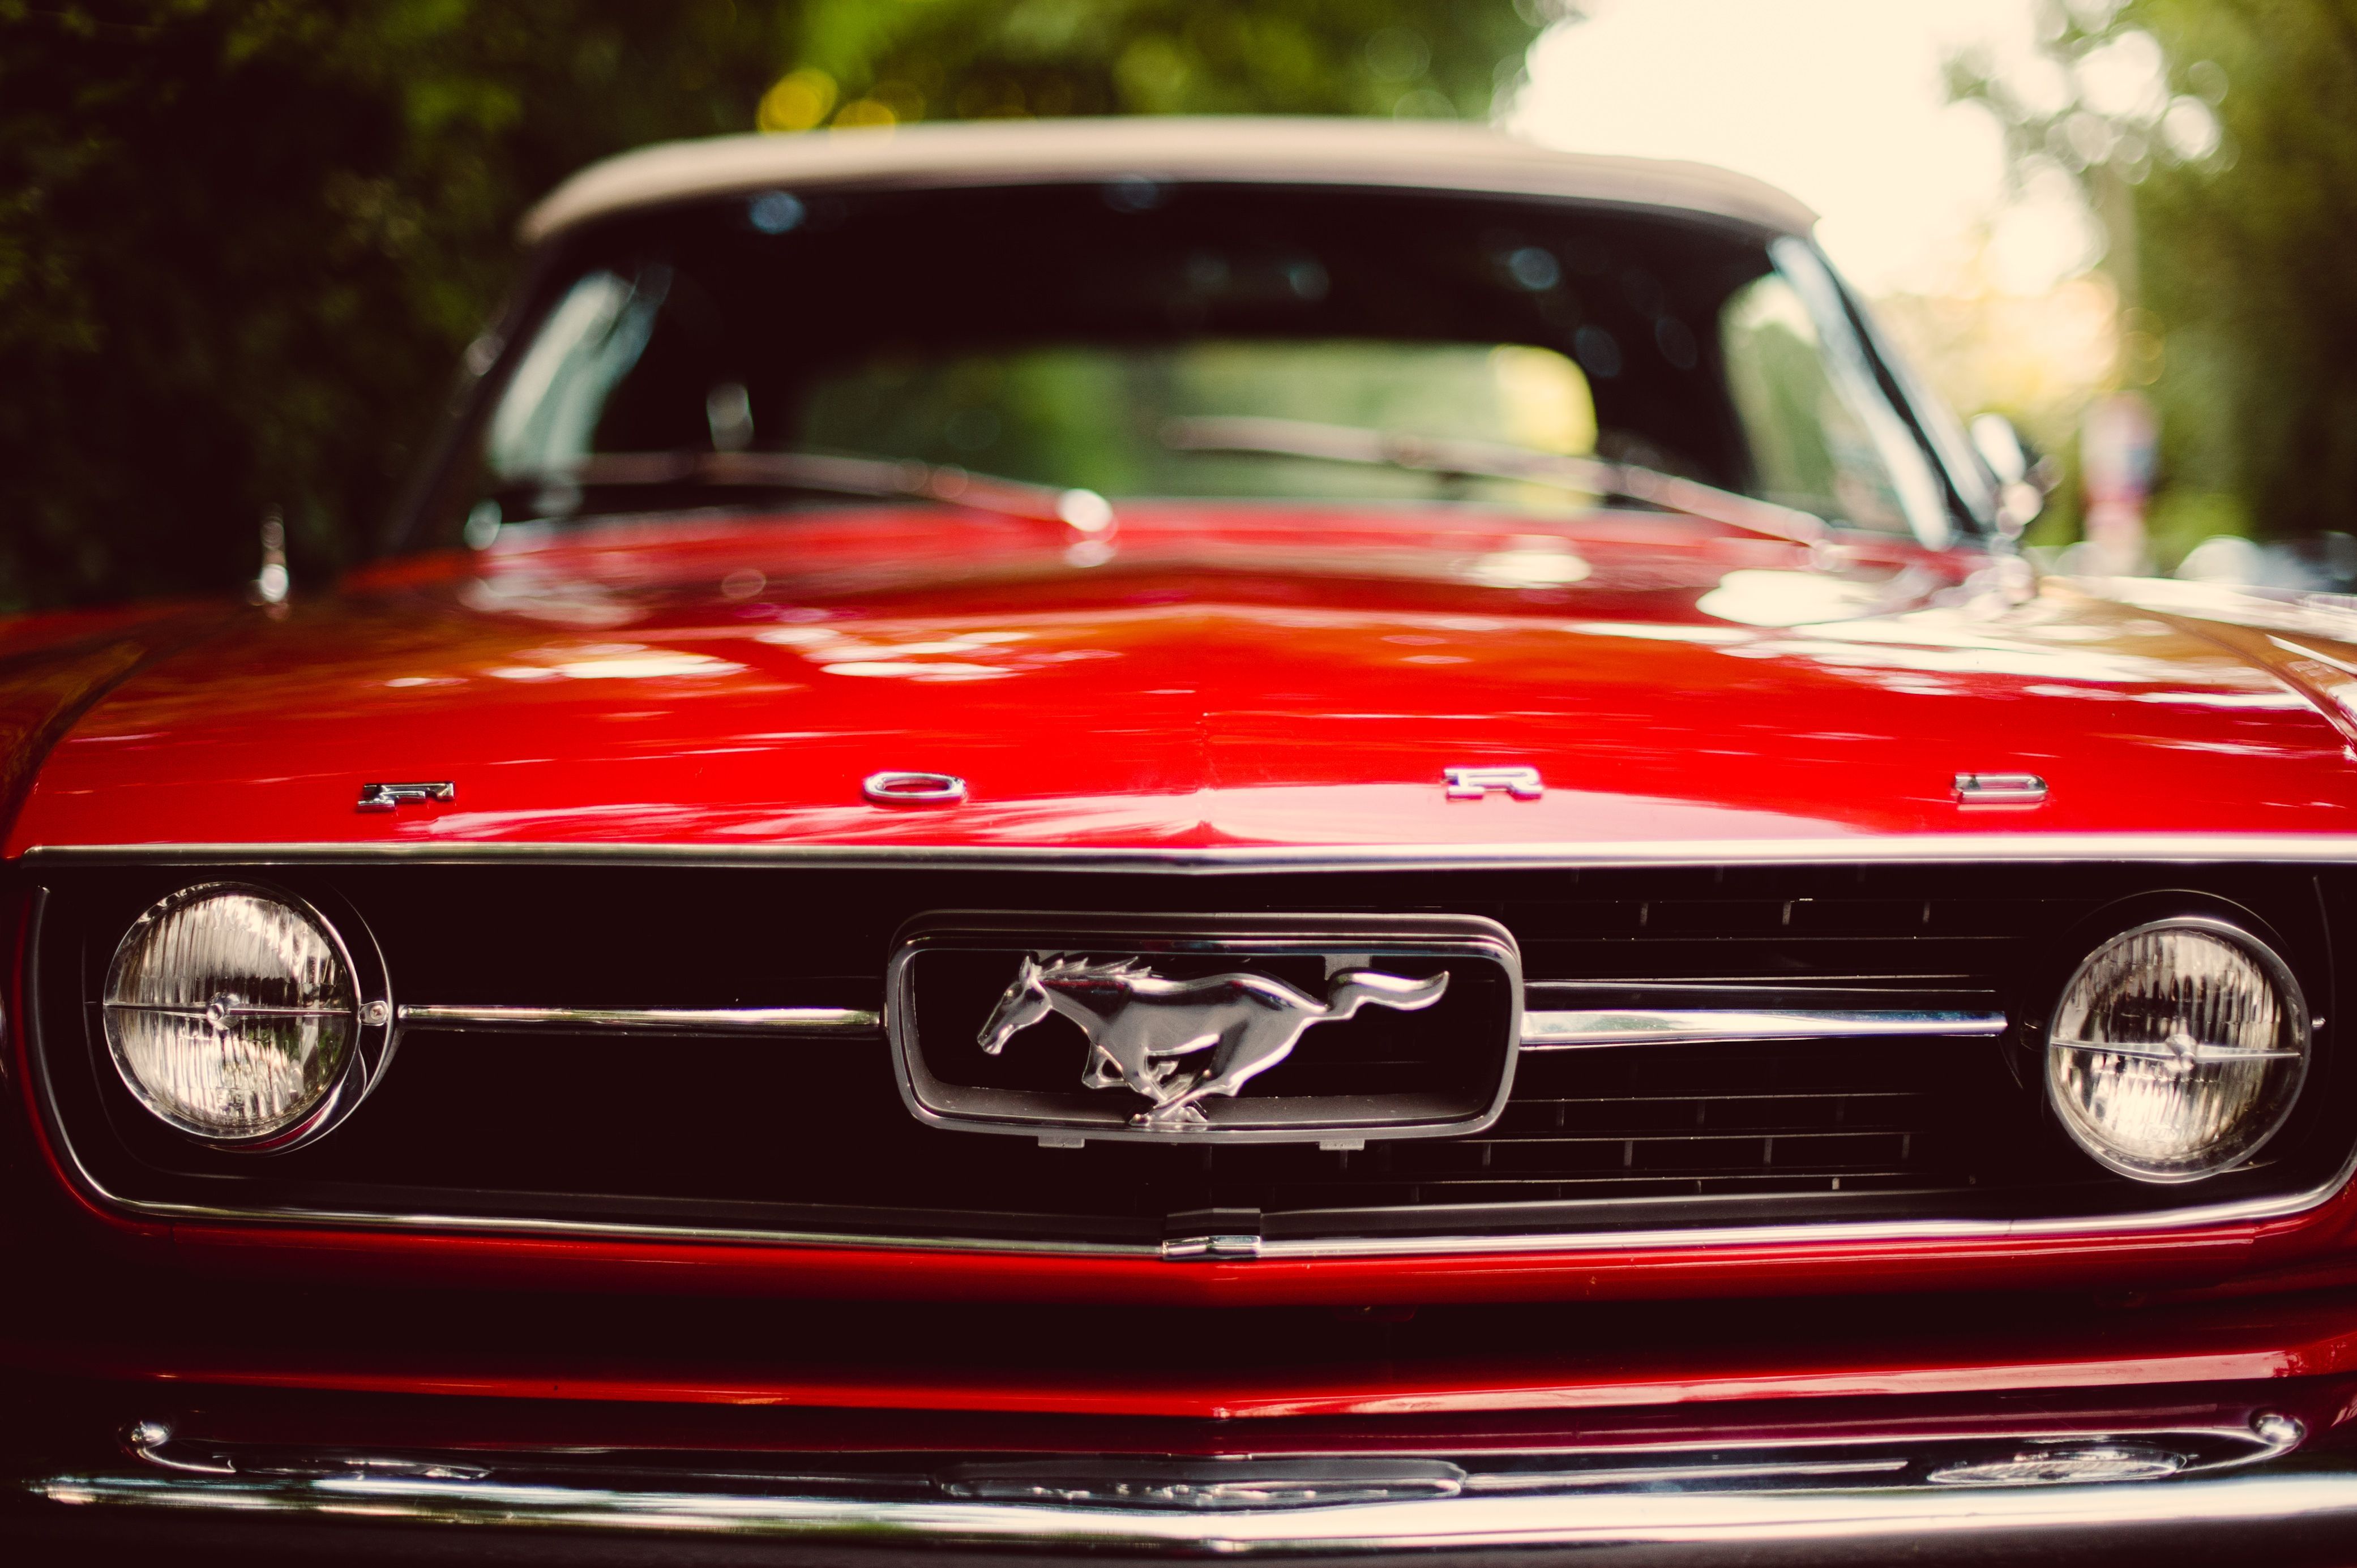 What year do you think this is?. Red mustang, Mustang wallpaper